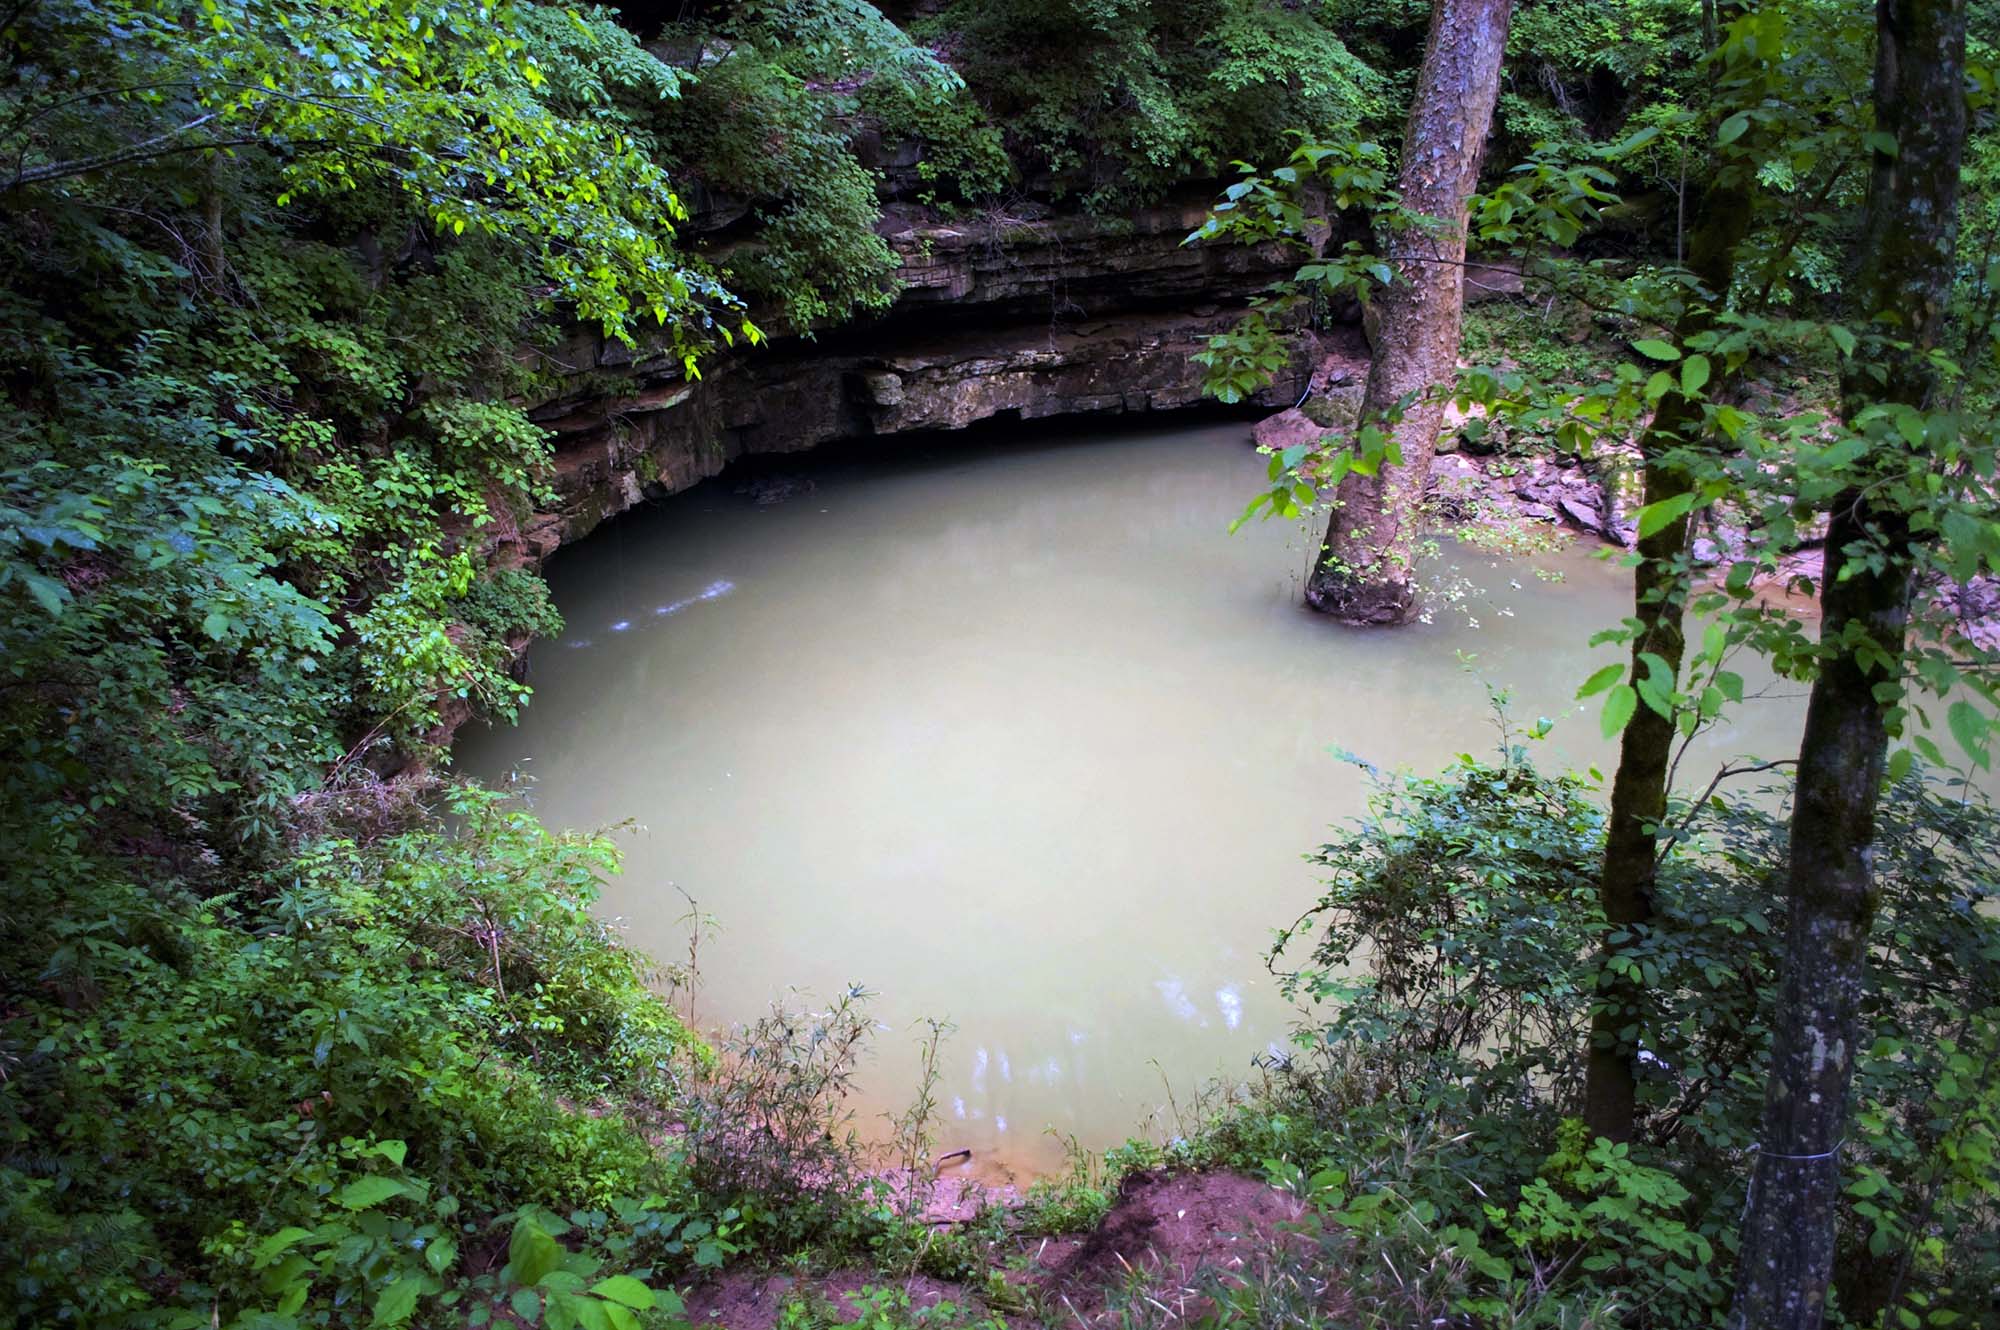 Waters wells up from a hole surrounded by trees and shrubs.